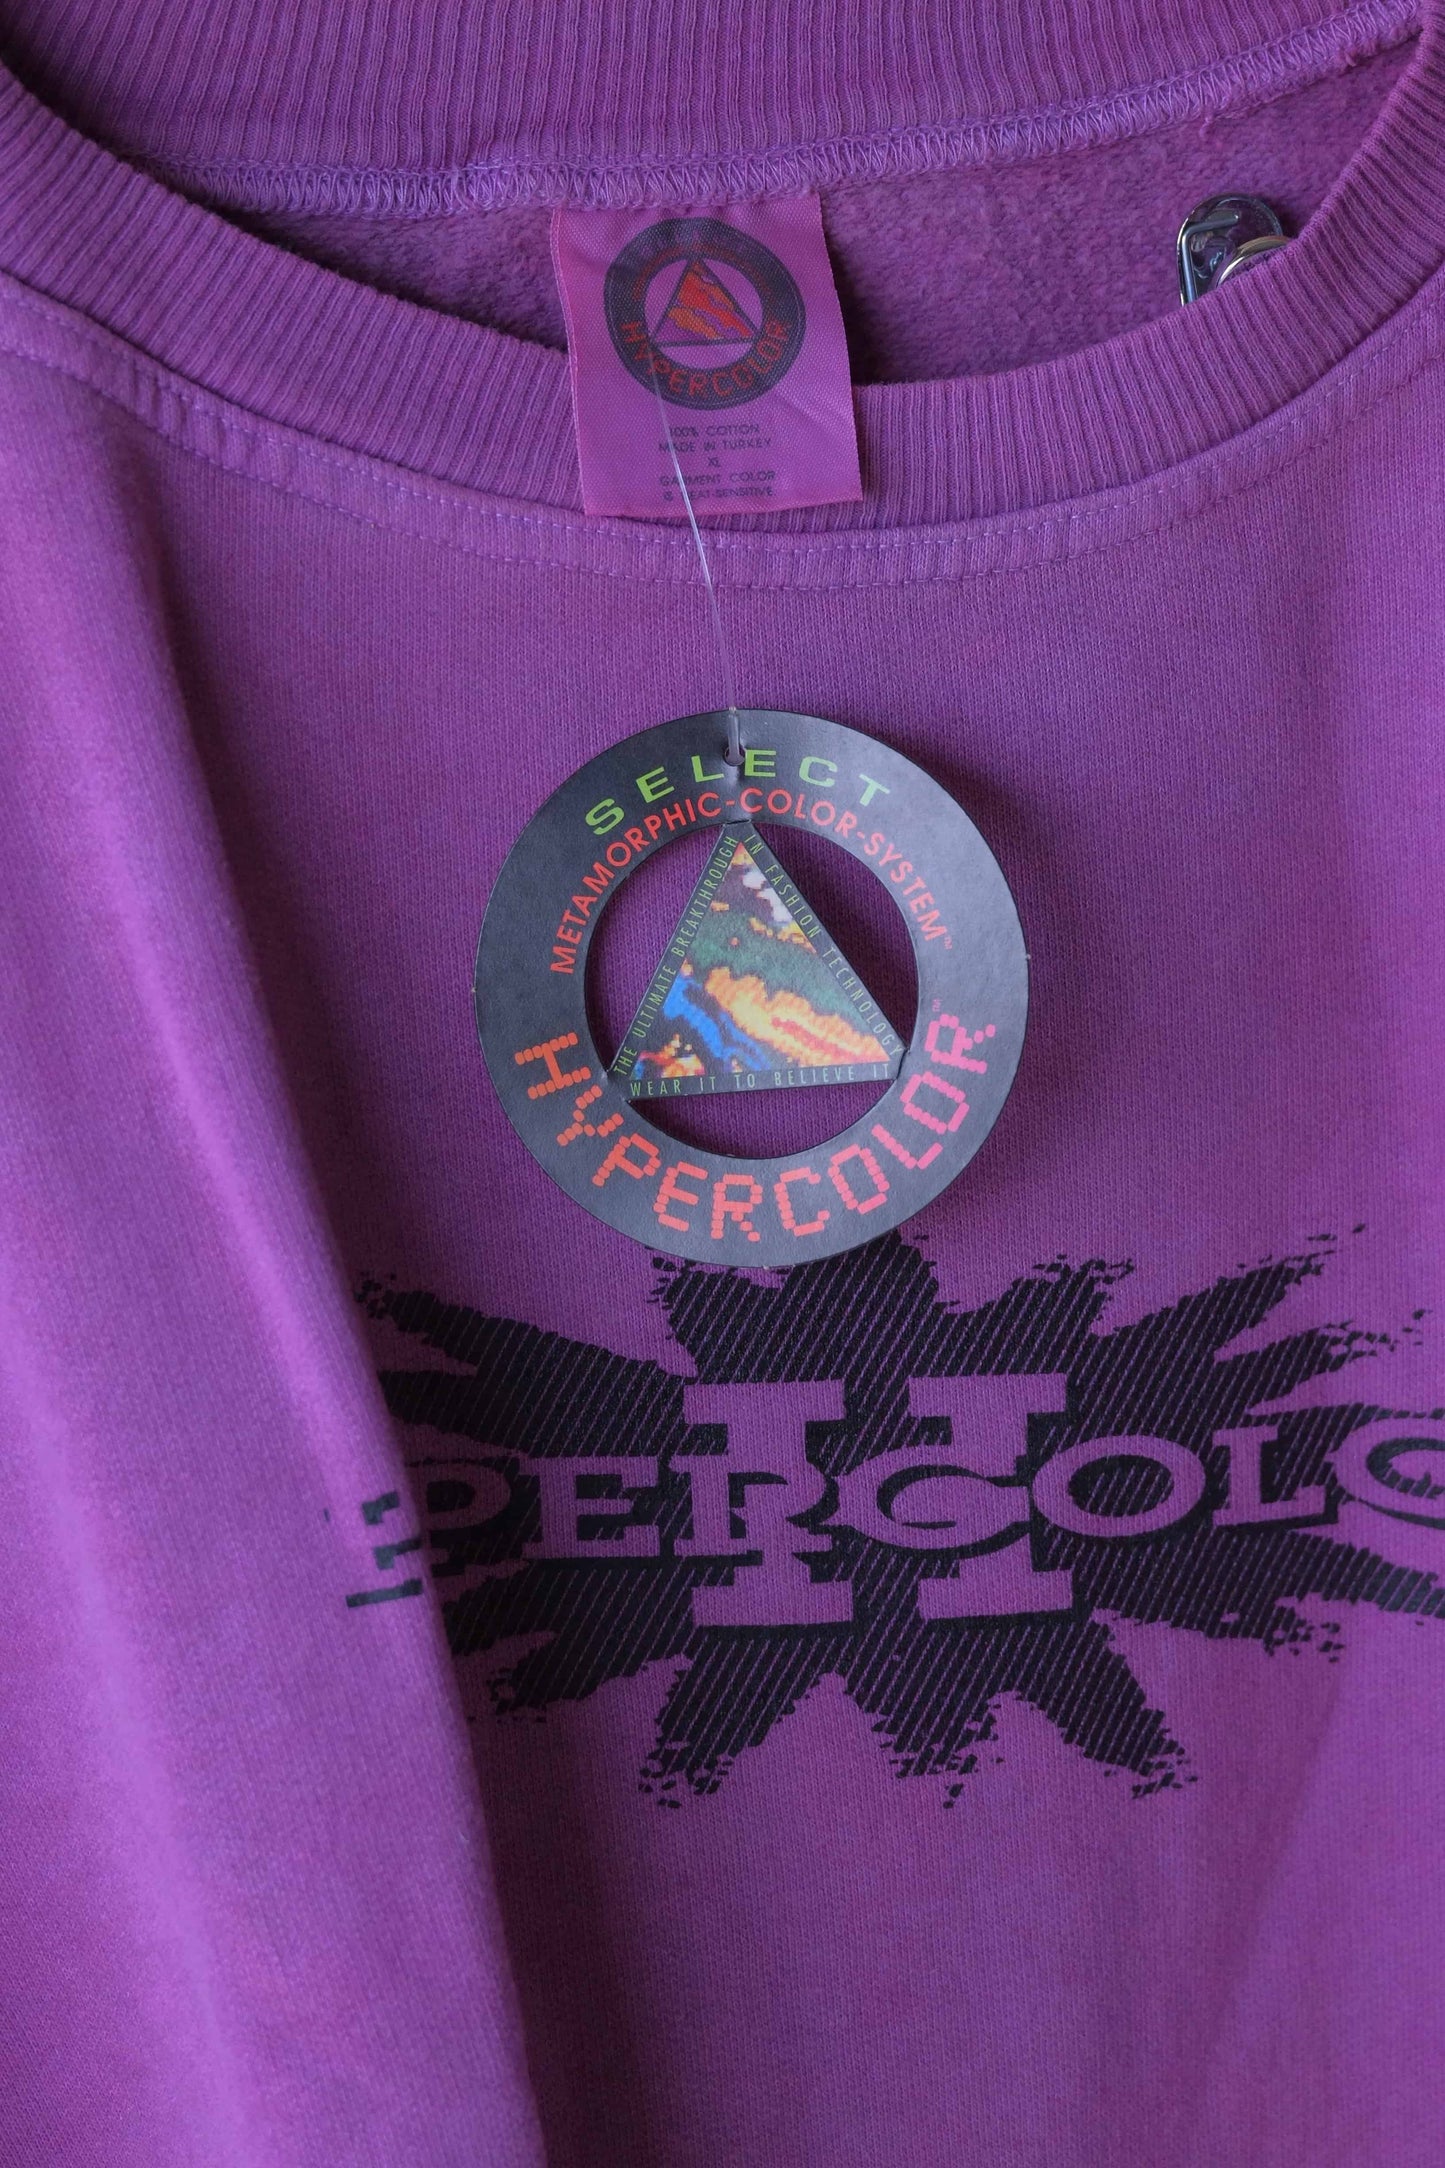 90's Hypercolor Color Changing Sweatshirt label tag